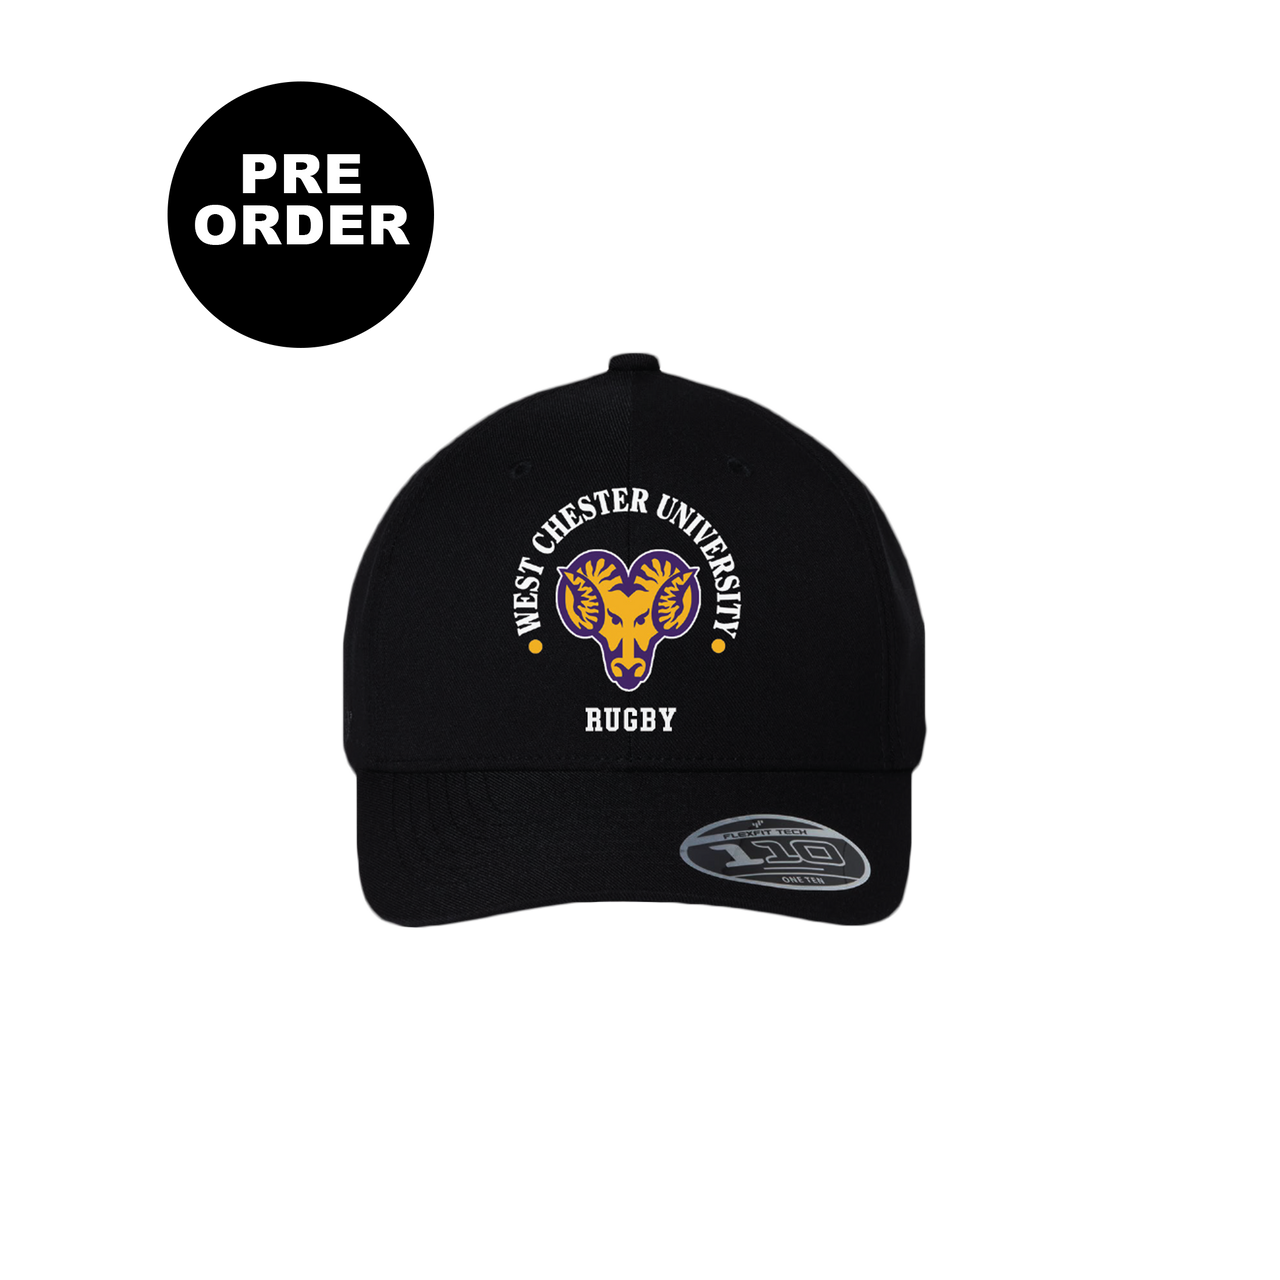 West Chester University Rugby Cap